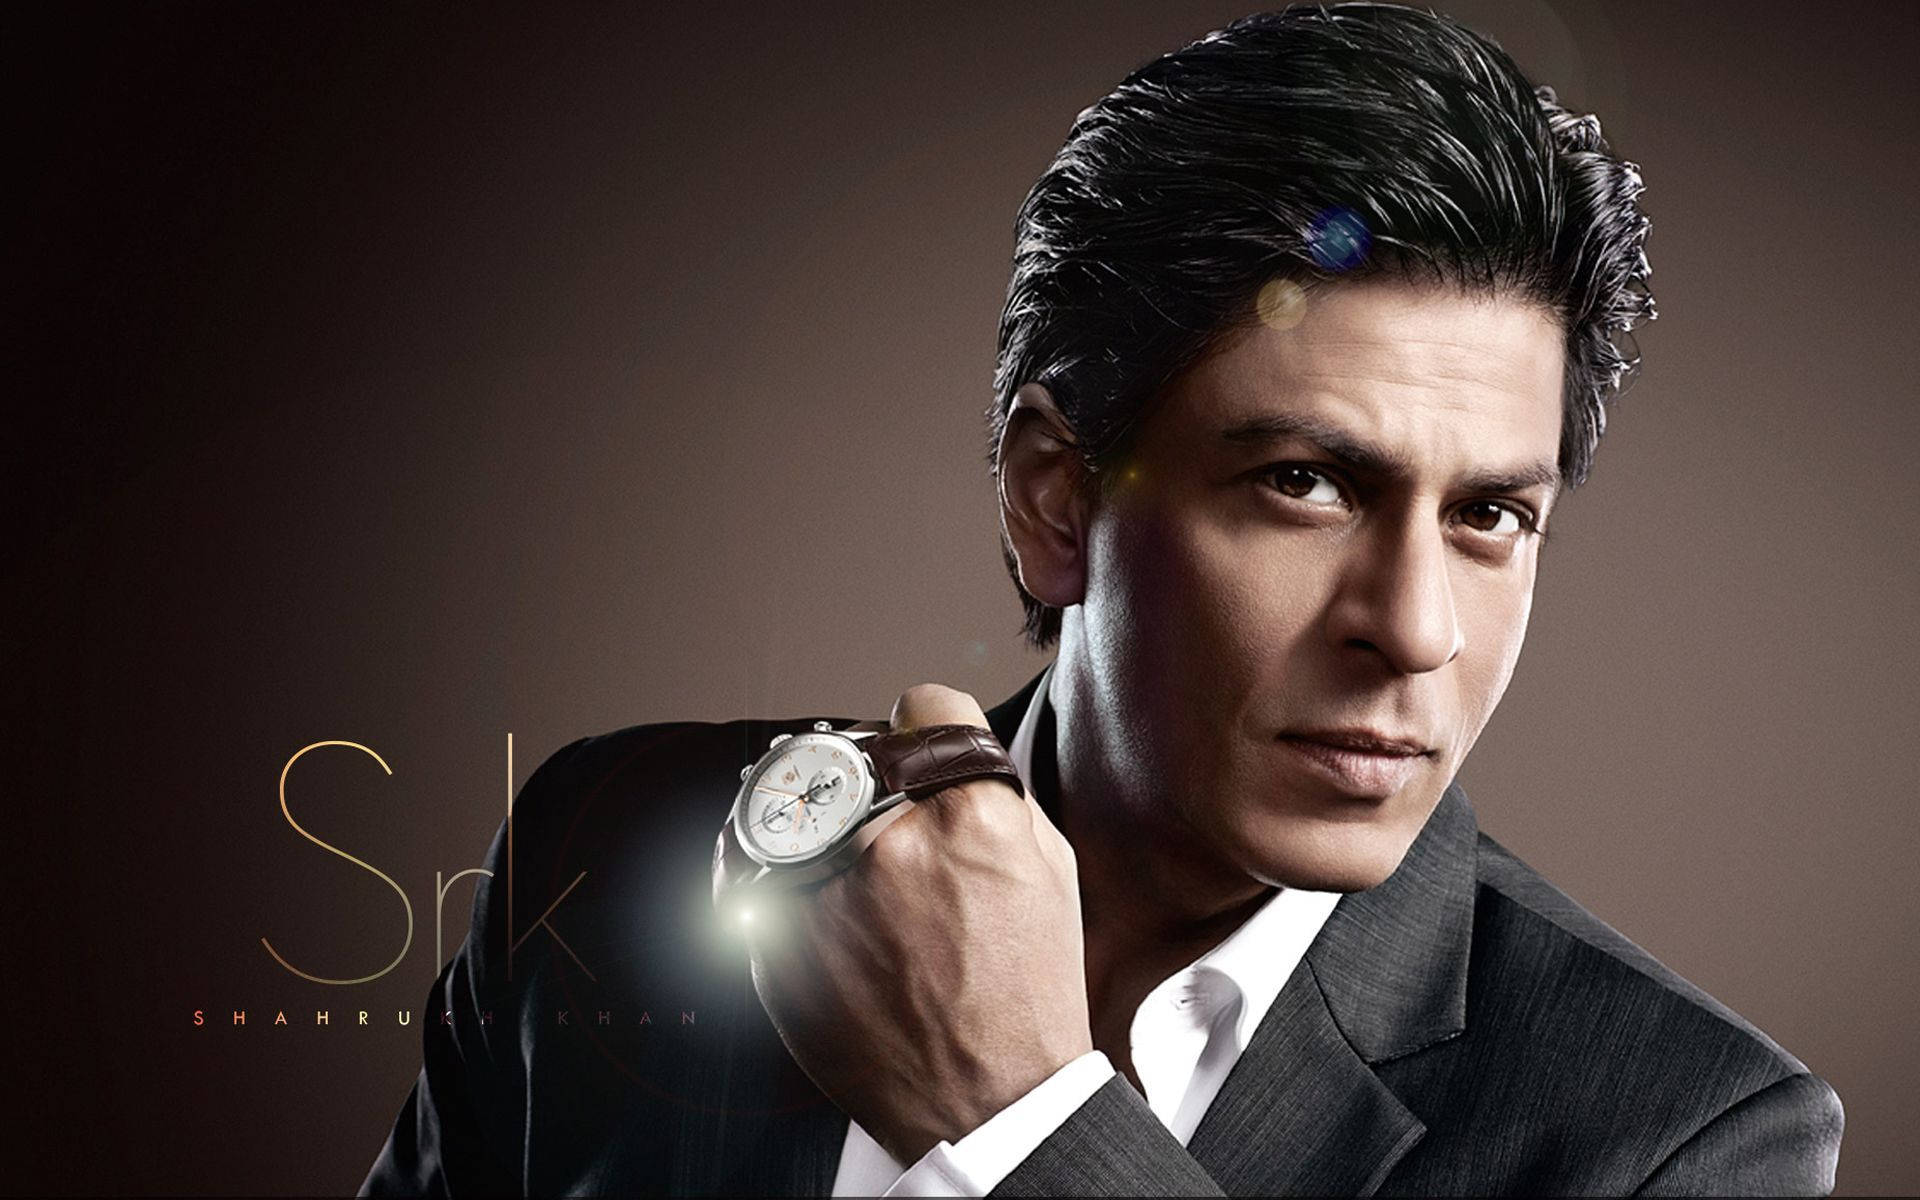 Shahrukh Khan For Tag Heuer Background